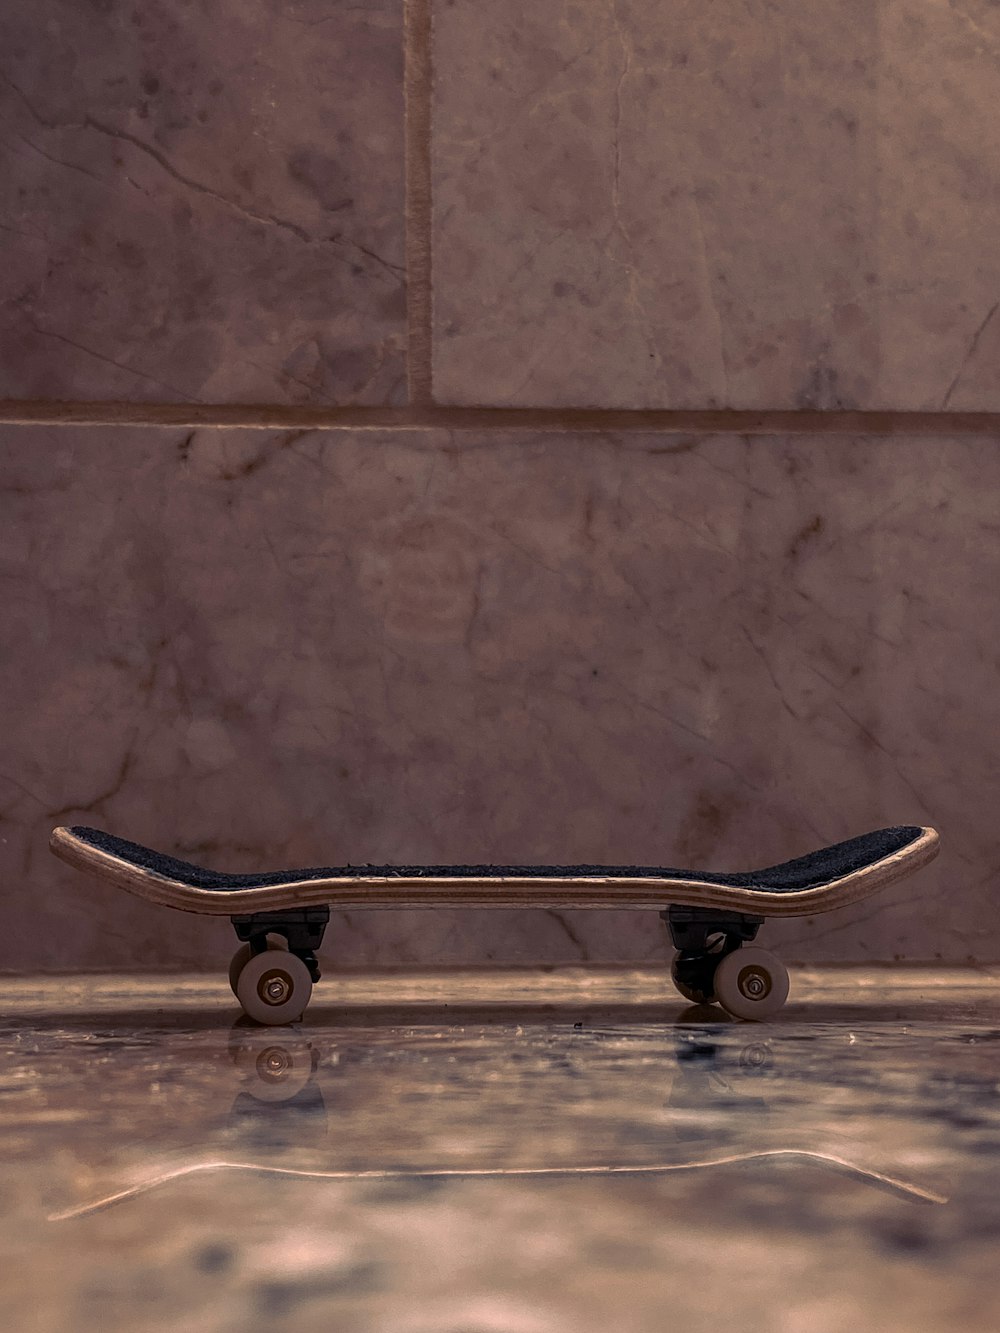 a skateboard sitting on the ground in front of a wall